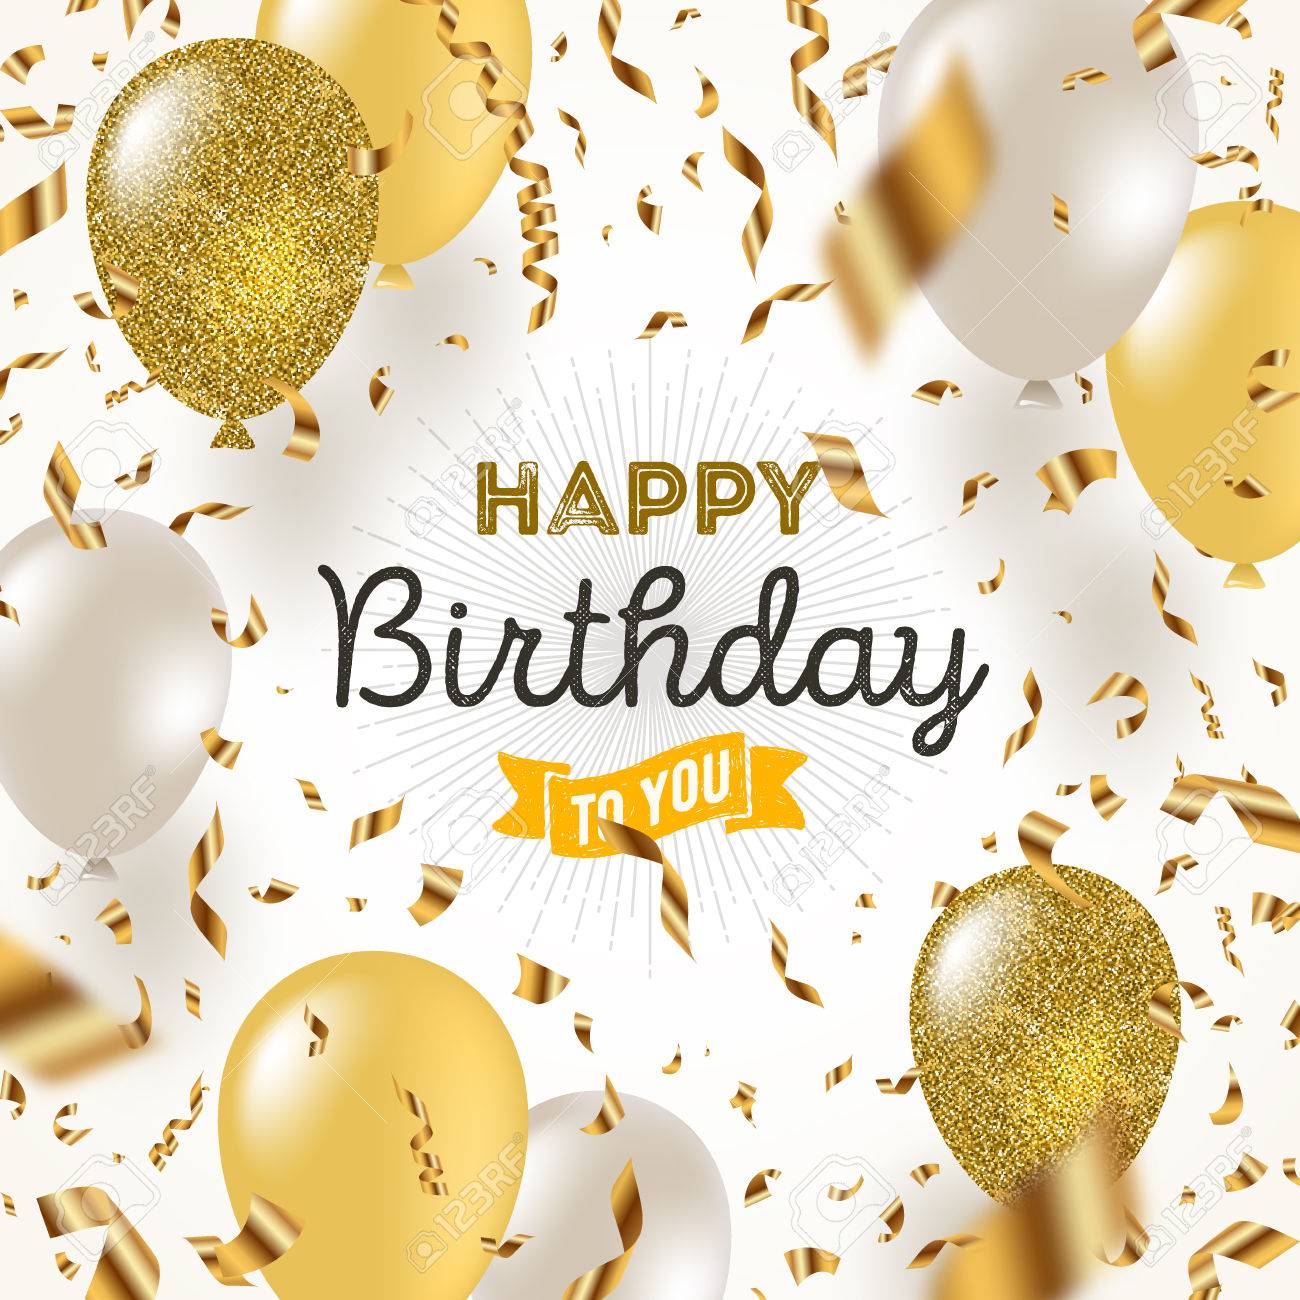 79409454-happy-birthday-vector-illustration-golden-foil-confetti-and-white-and-glitter-gold-balloons-.jpg